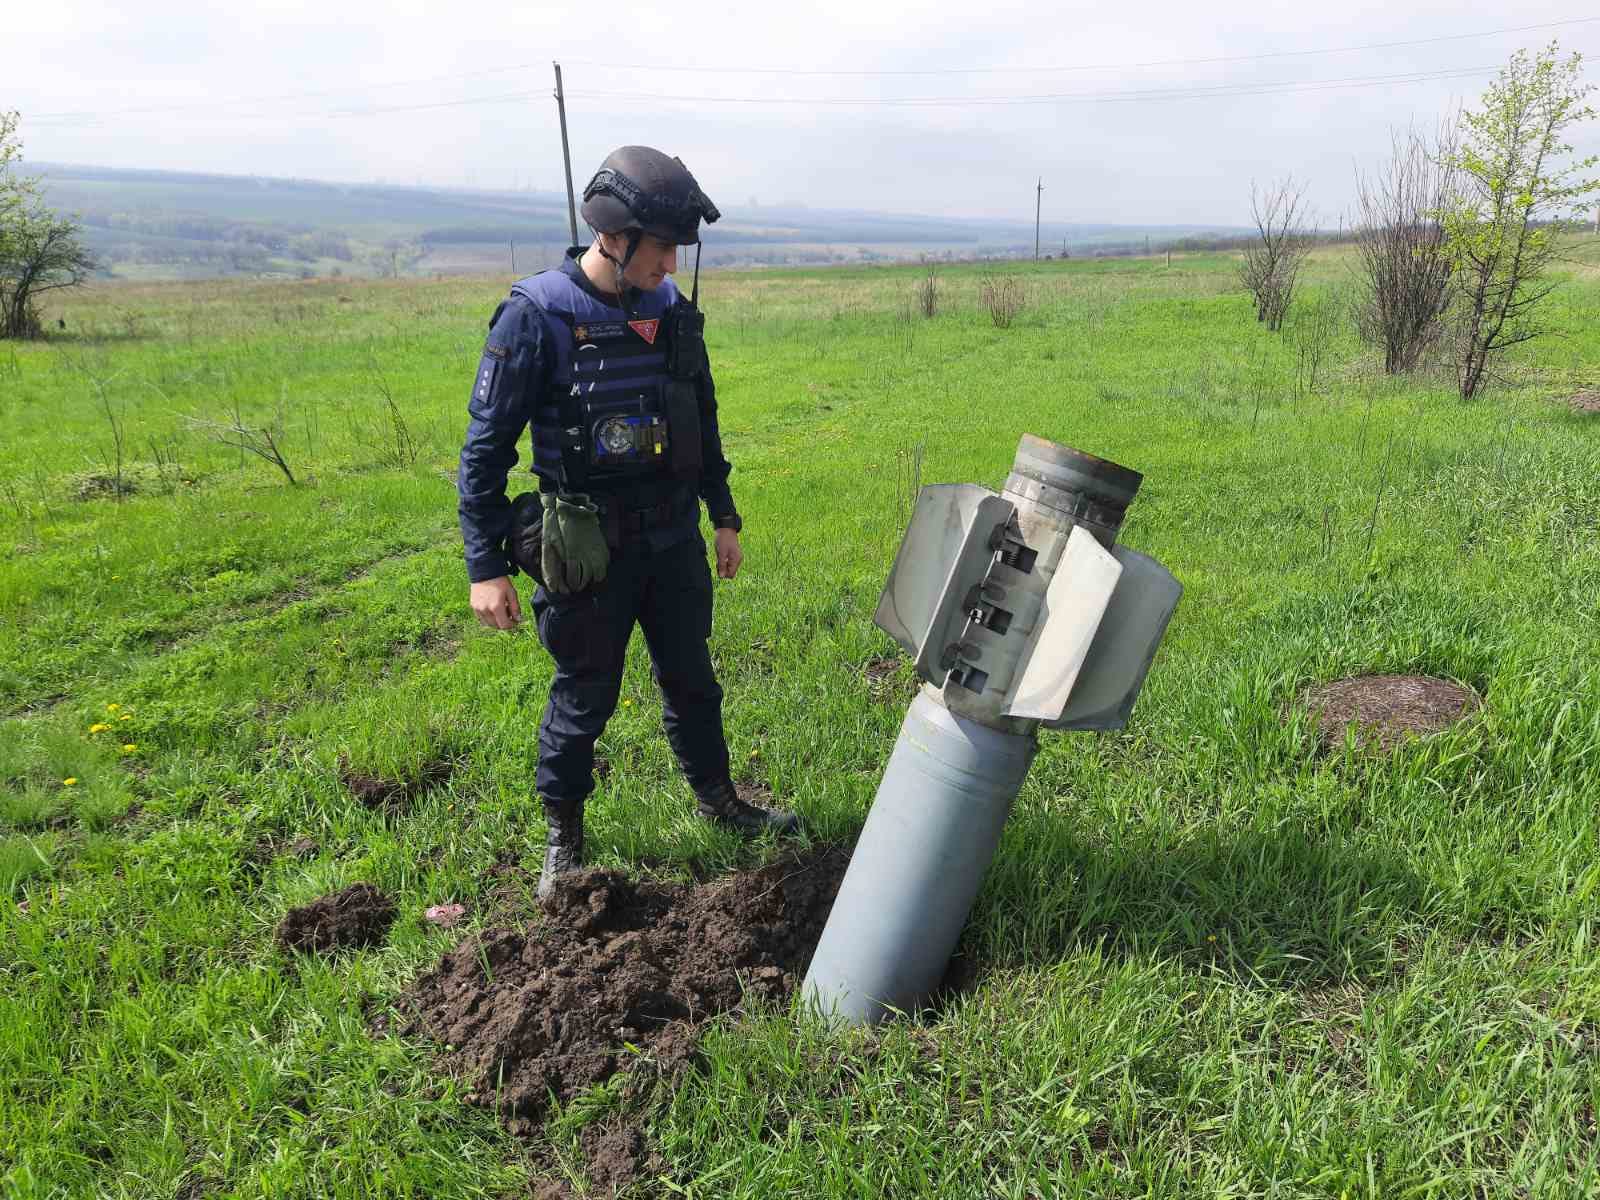 A member of the State Emergency Service of Ukraine prepares to disable and remove a missile in Rubizhne in the Luhansk region of Ukraine, on April 27.